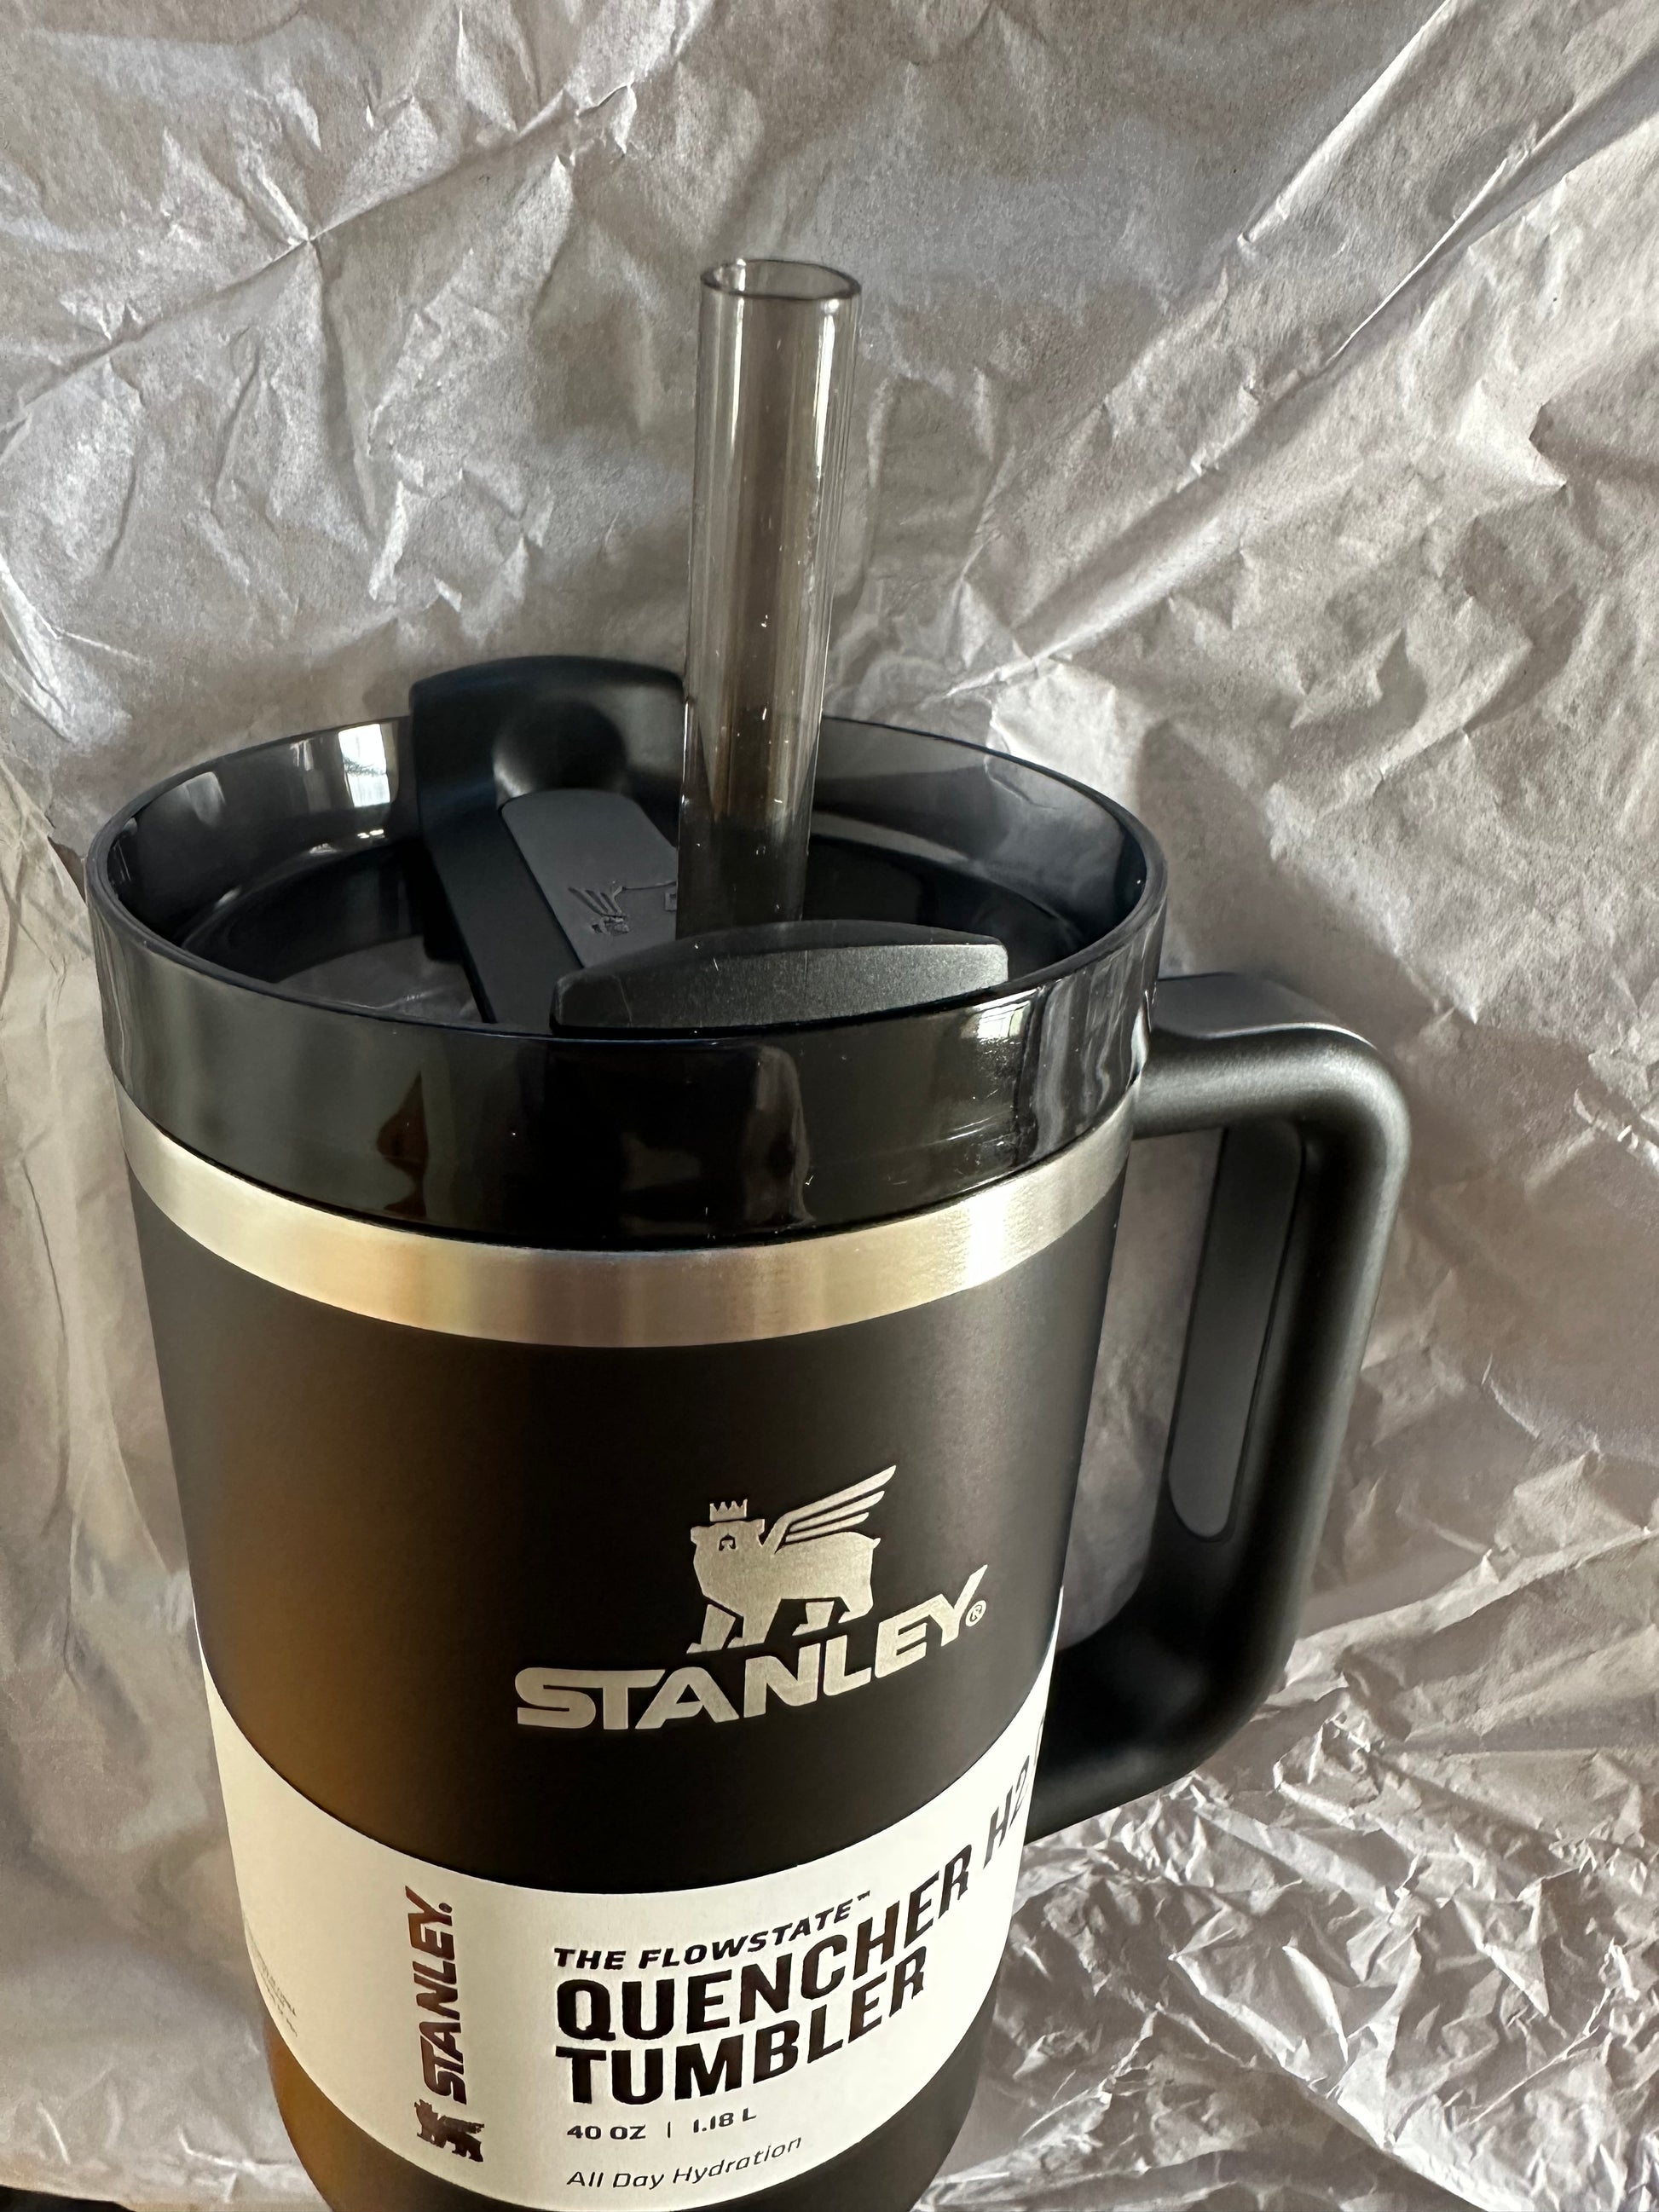 Stanely The Flowstate Quencher Stainless Steel Tumbler